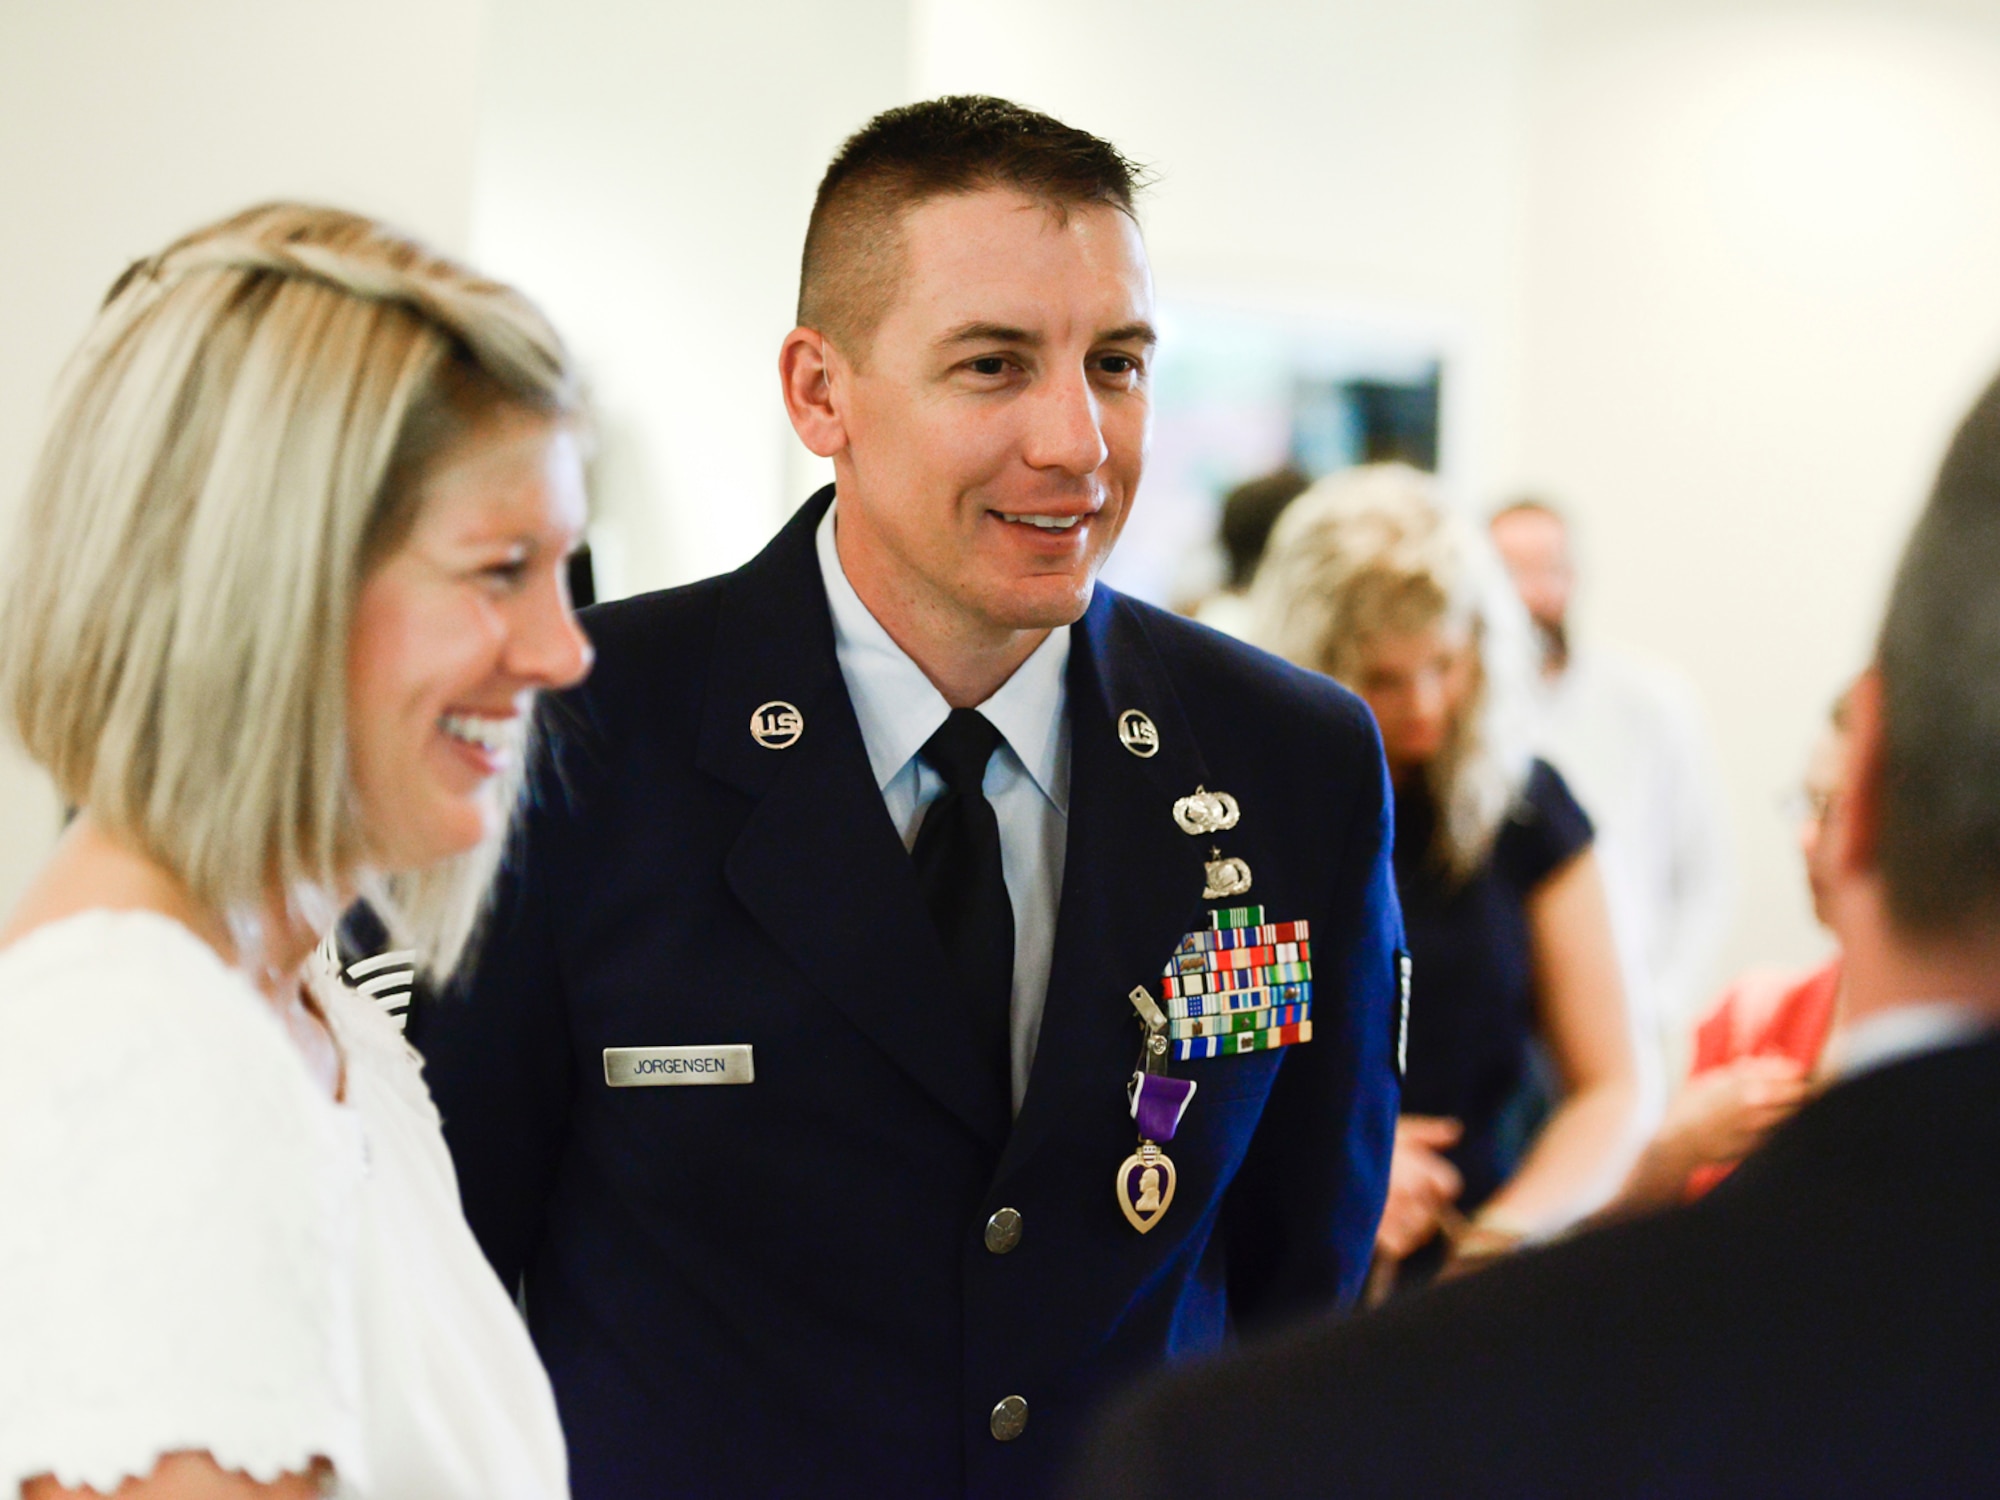 Oklahoma Air National Guard Tech. Sgt. Kody Jorgensen, assigned to the 138th Logistics Readiness Squadron, speaks with ceremony guests after receiving a Purple Heart Sept. 6, 2014, at the Tulsa Air National Guard base, Tulsa Okla. Jorgensen was wounded August 27, 2012, while serving in Afghanistan with the Georgia National Guard's 265th Regional Support Group, Agri-business Development Team II.  (U.S. National Guard photo by Master Sgt.  Mark A. Moore/Released)